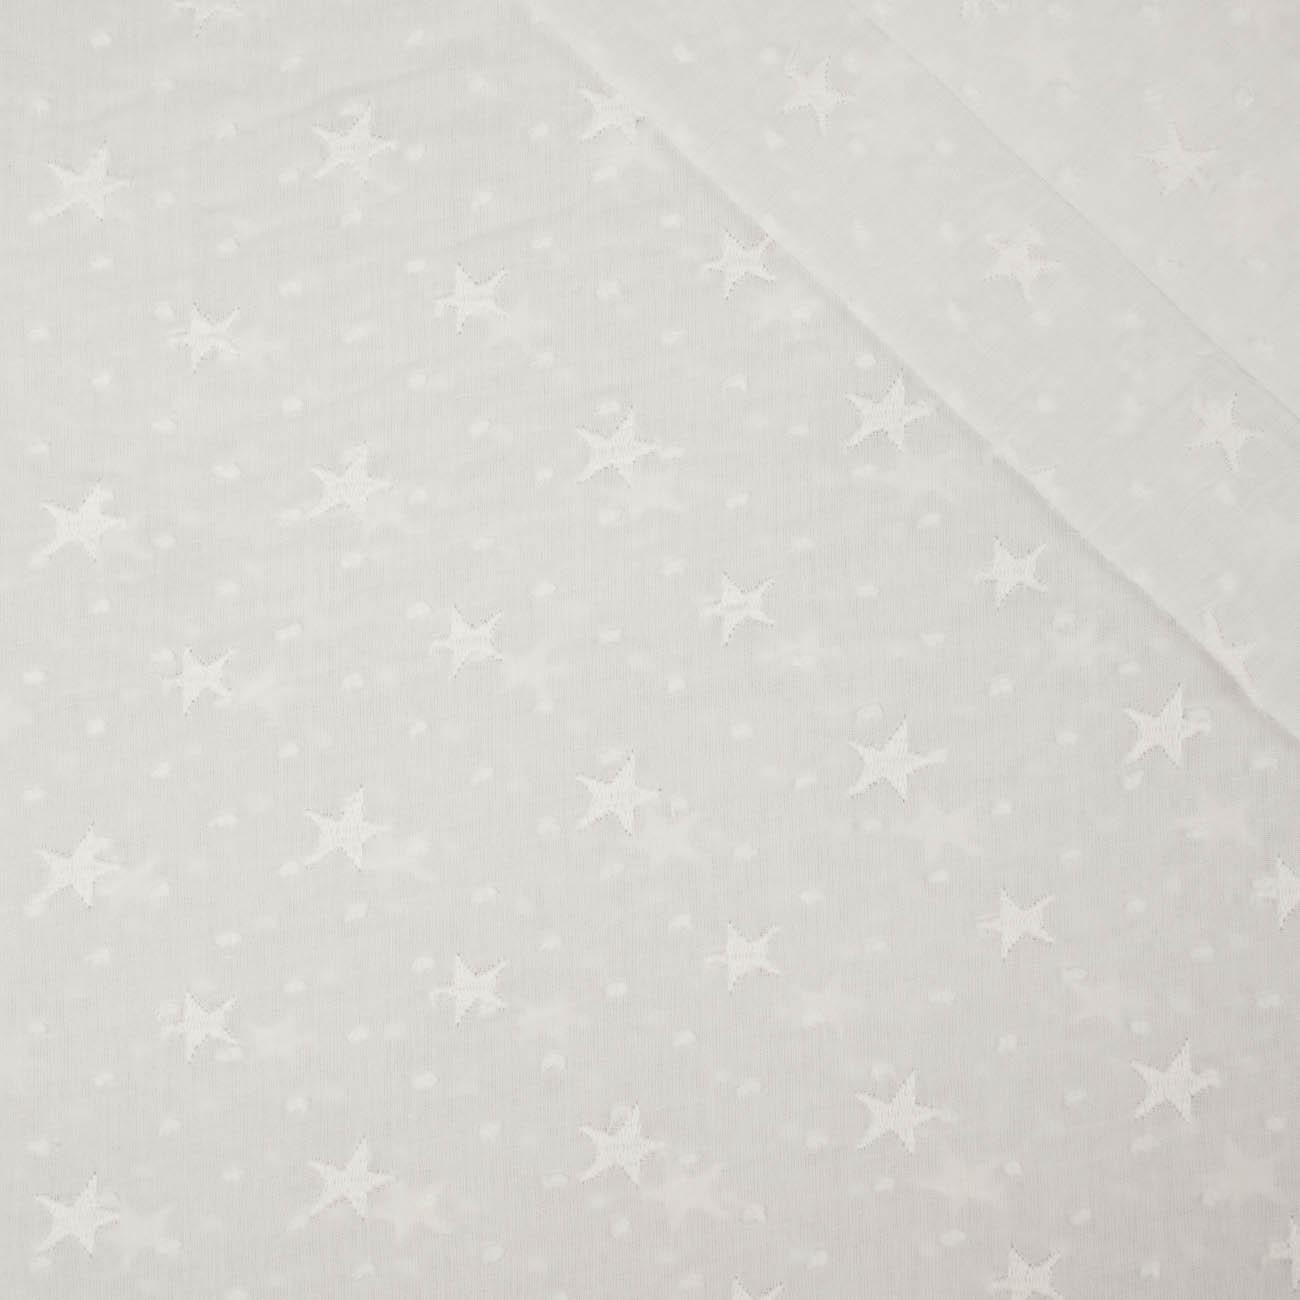 STARS / white - Embroidered cotton fabric